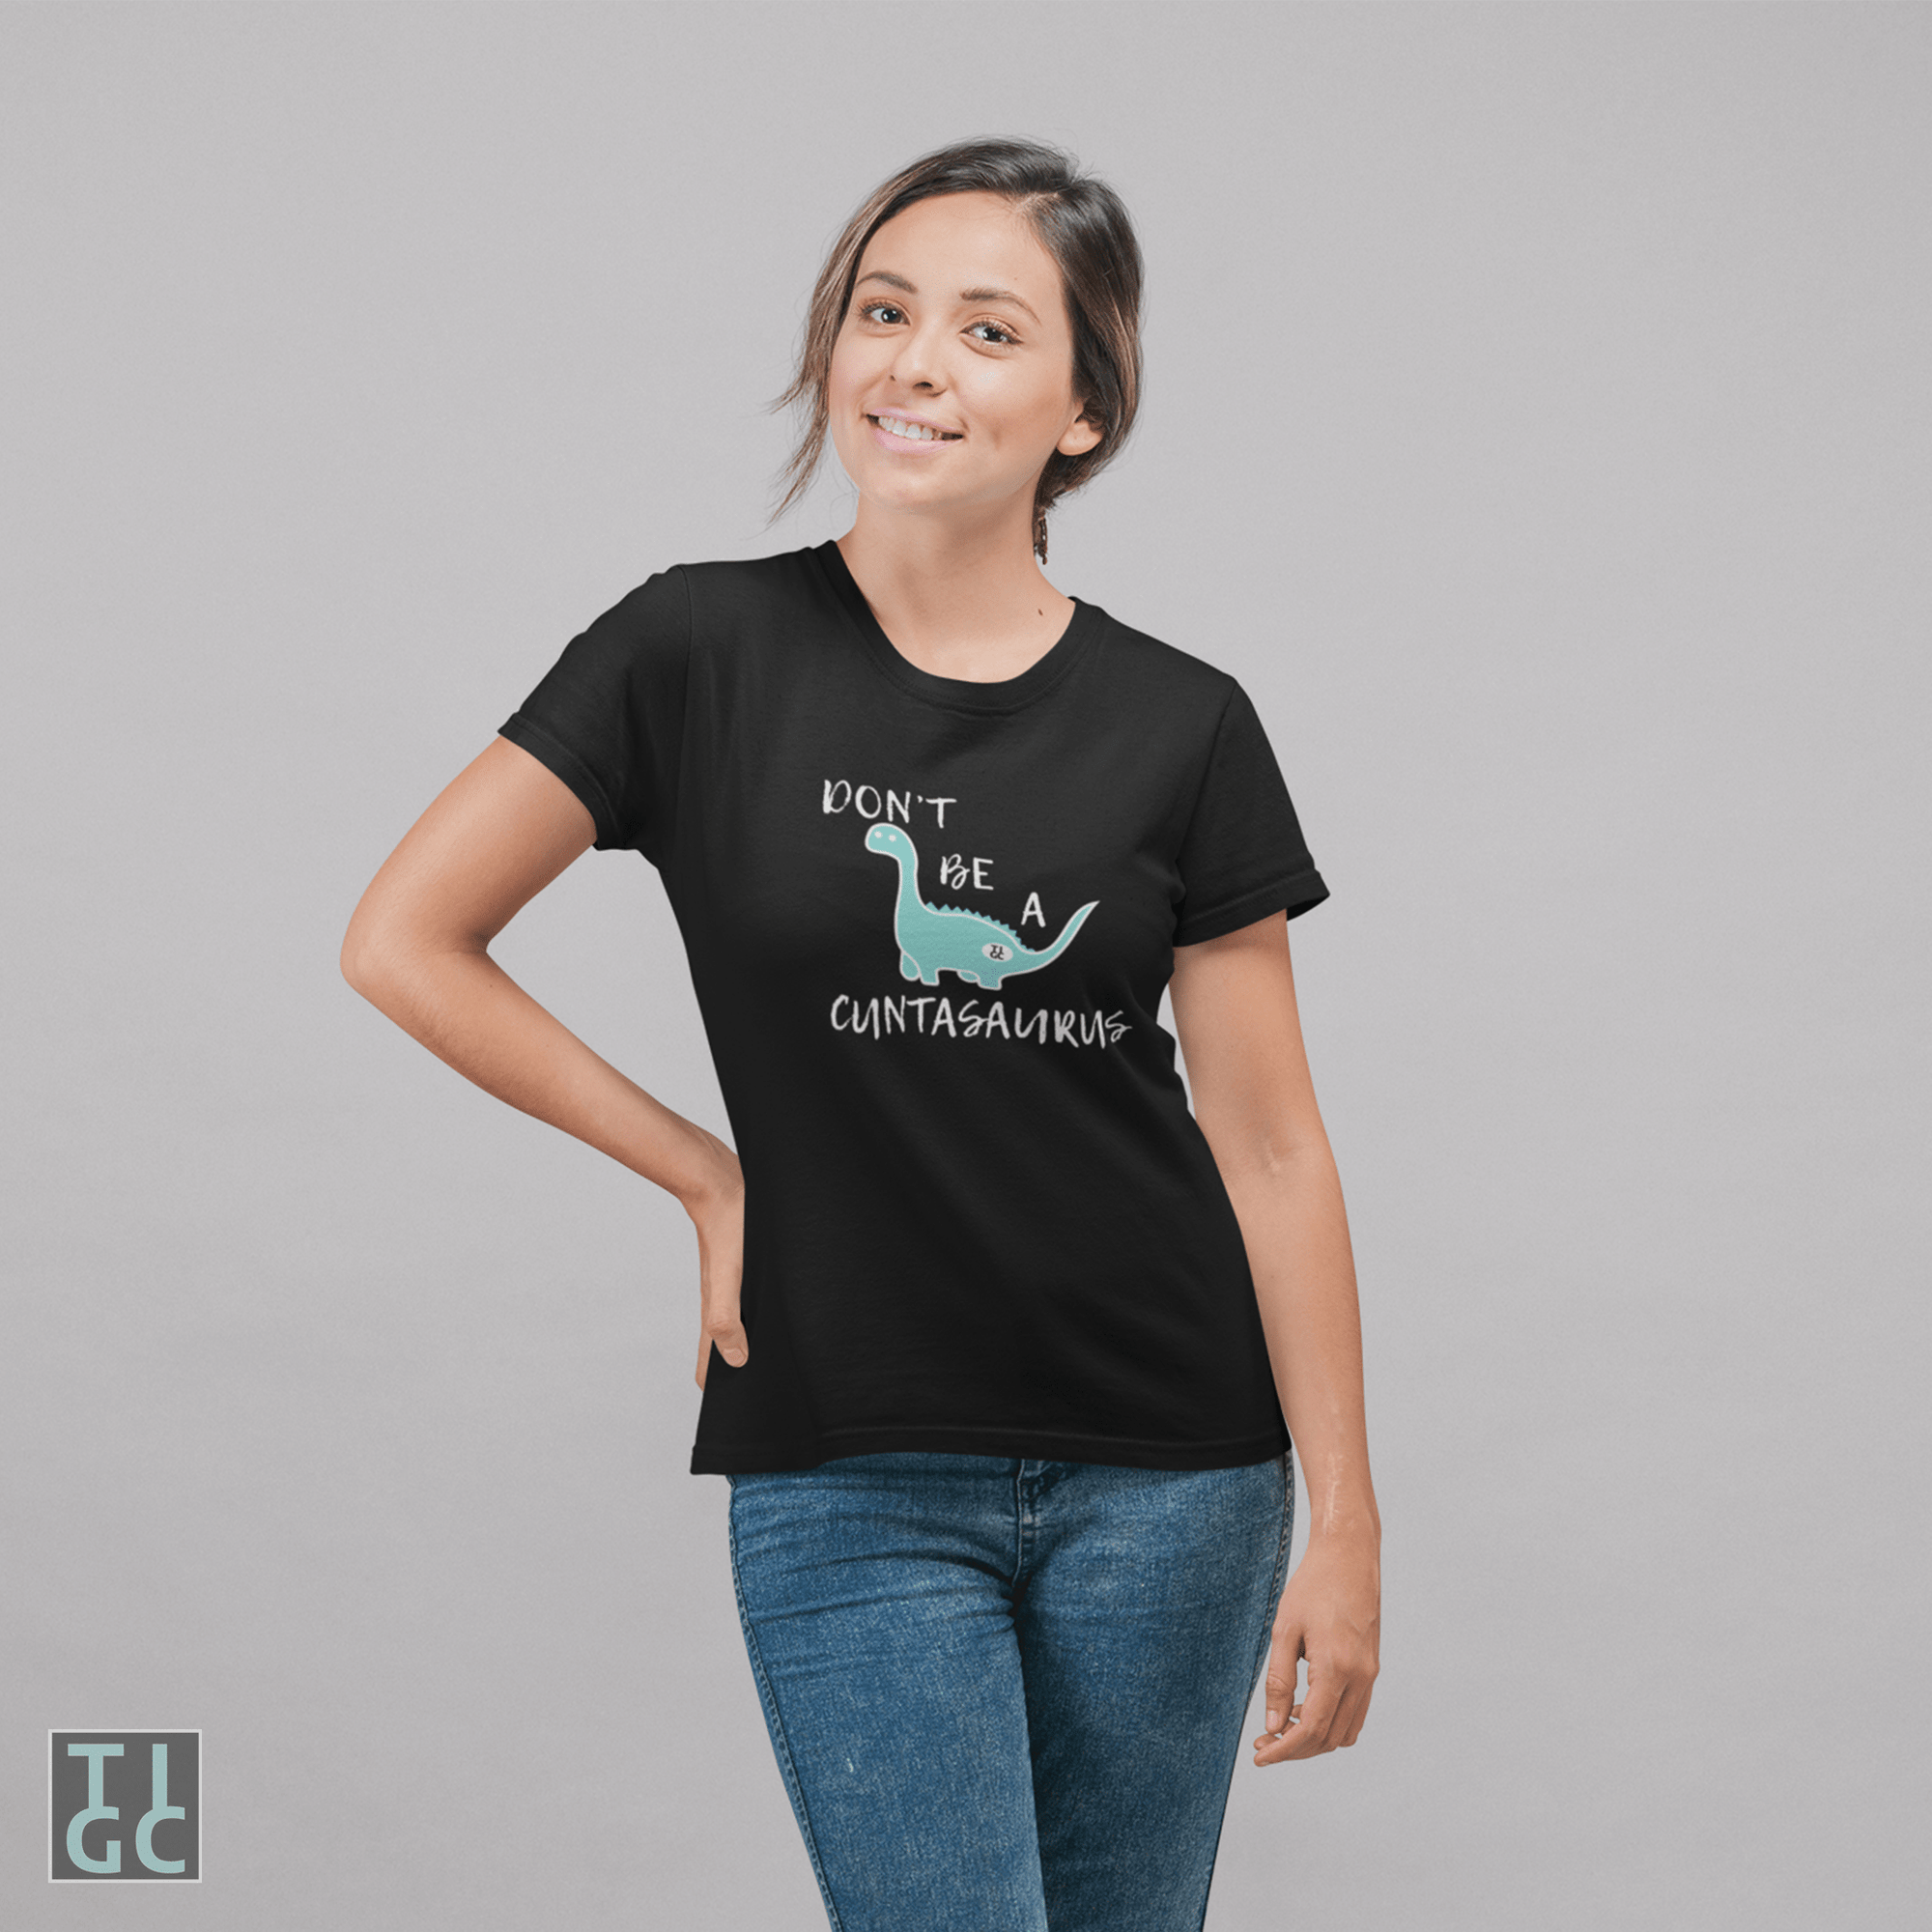 TIGC The Inappropriate Gift Co Cuntasaurus t-shirt